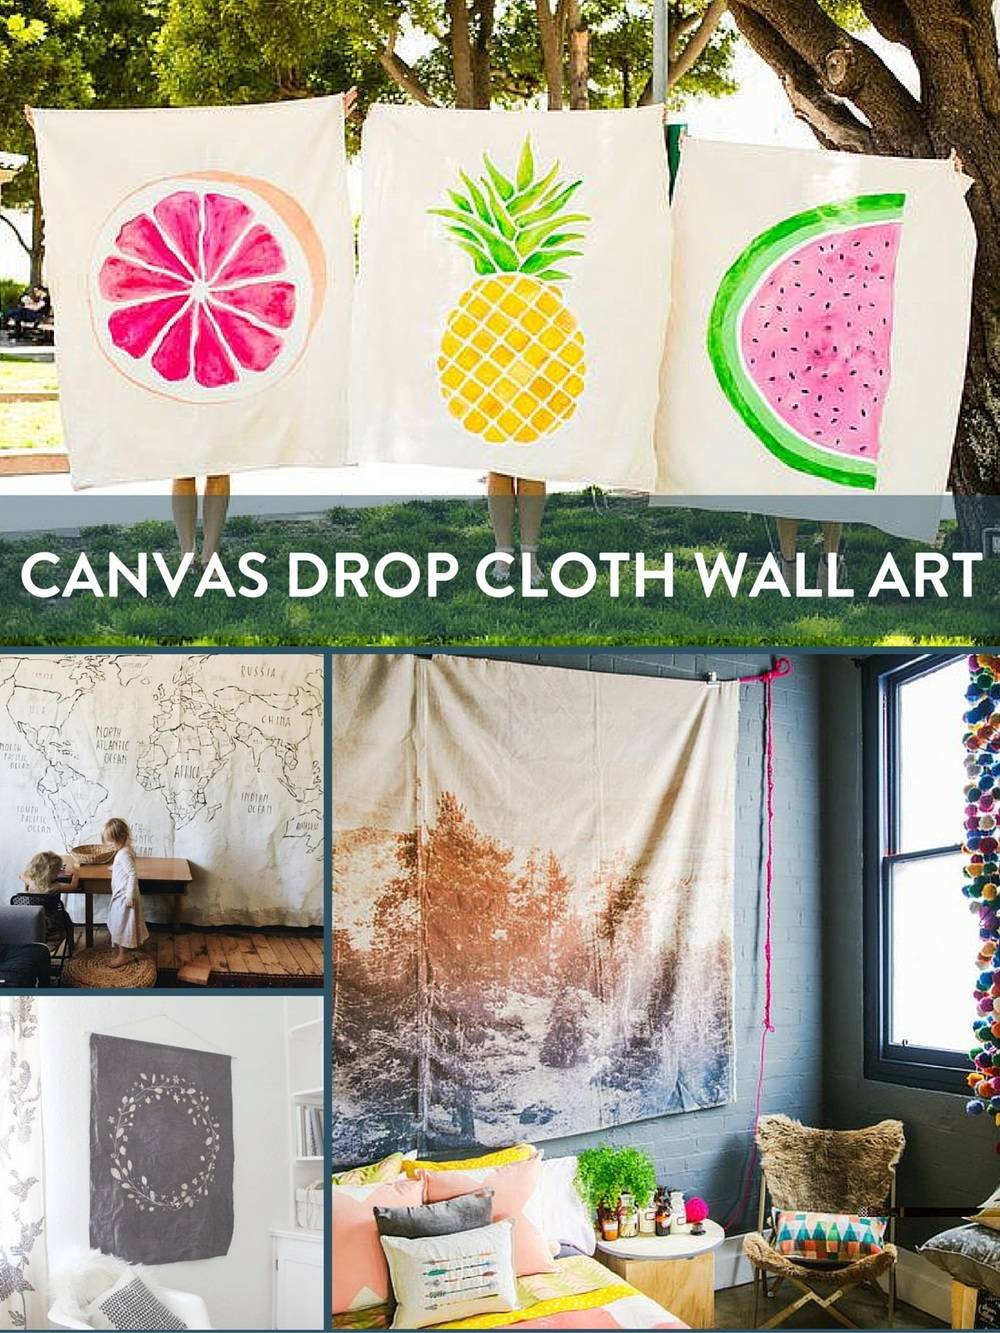 Canvas drop cloths with pictures drawn on them.